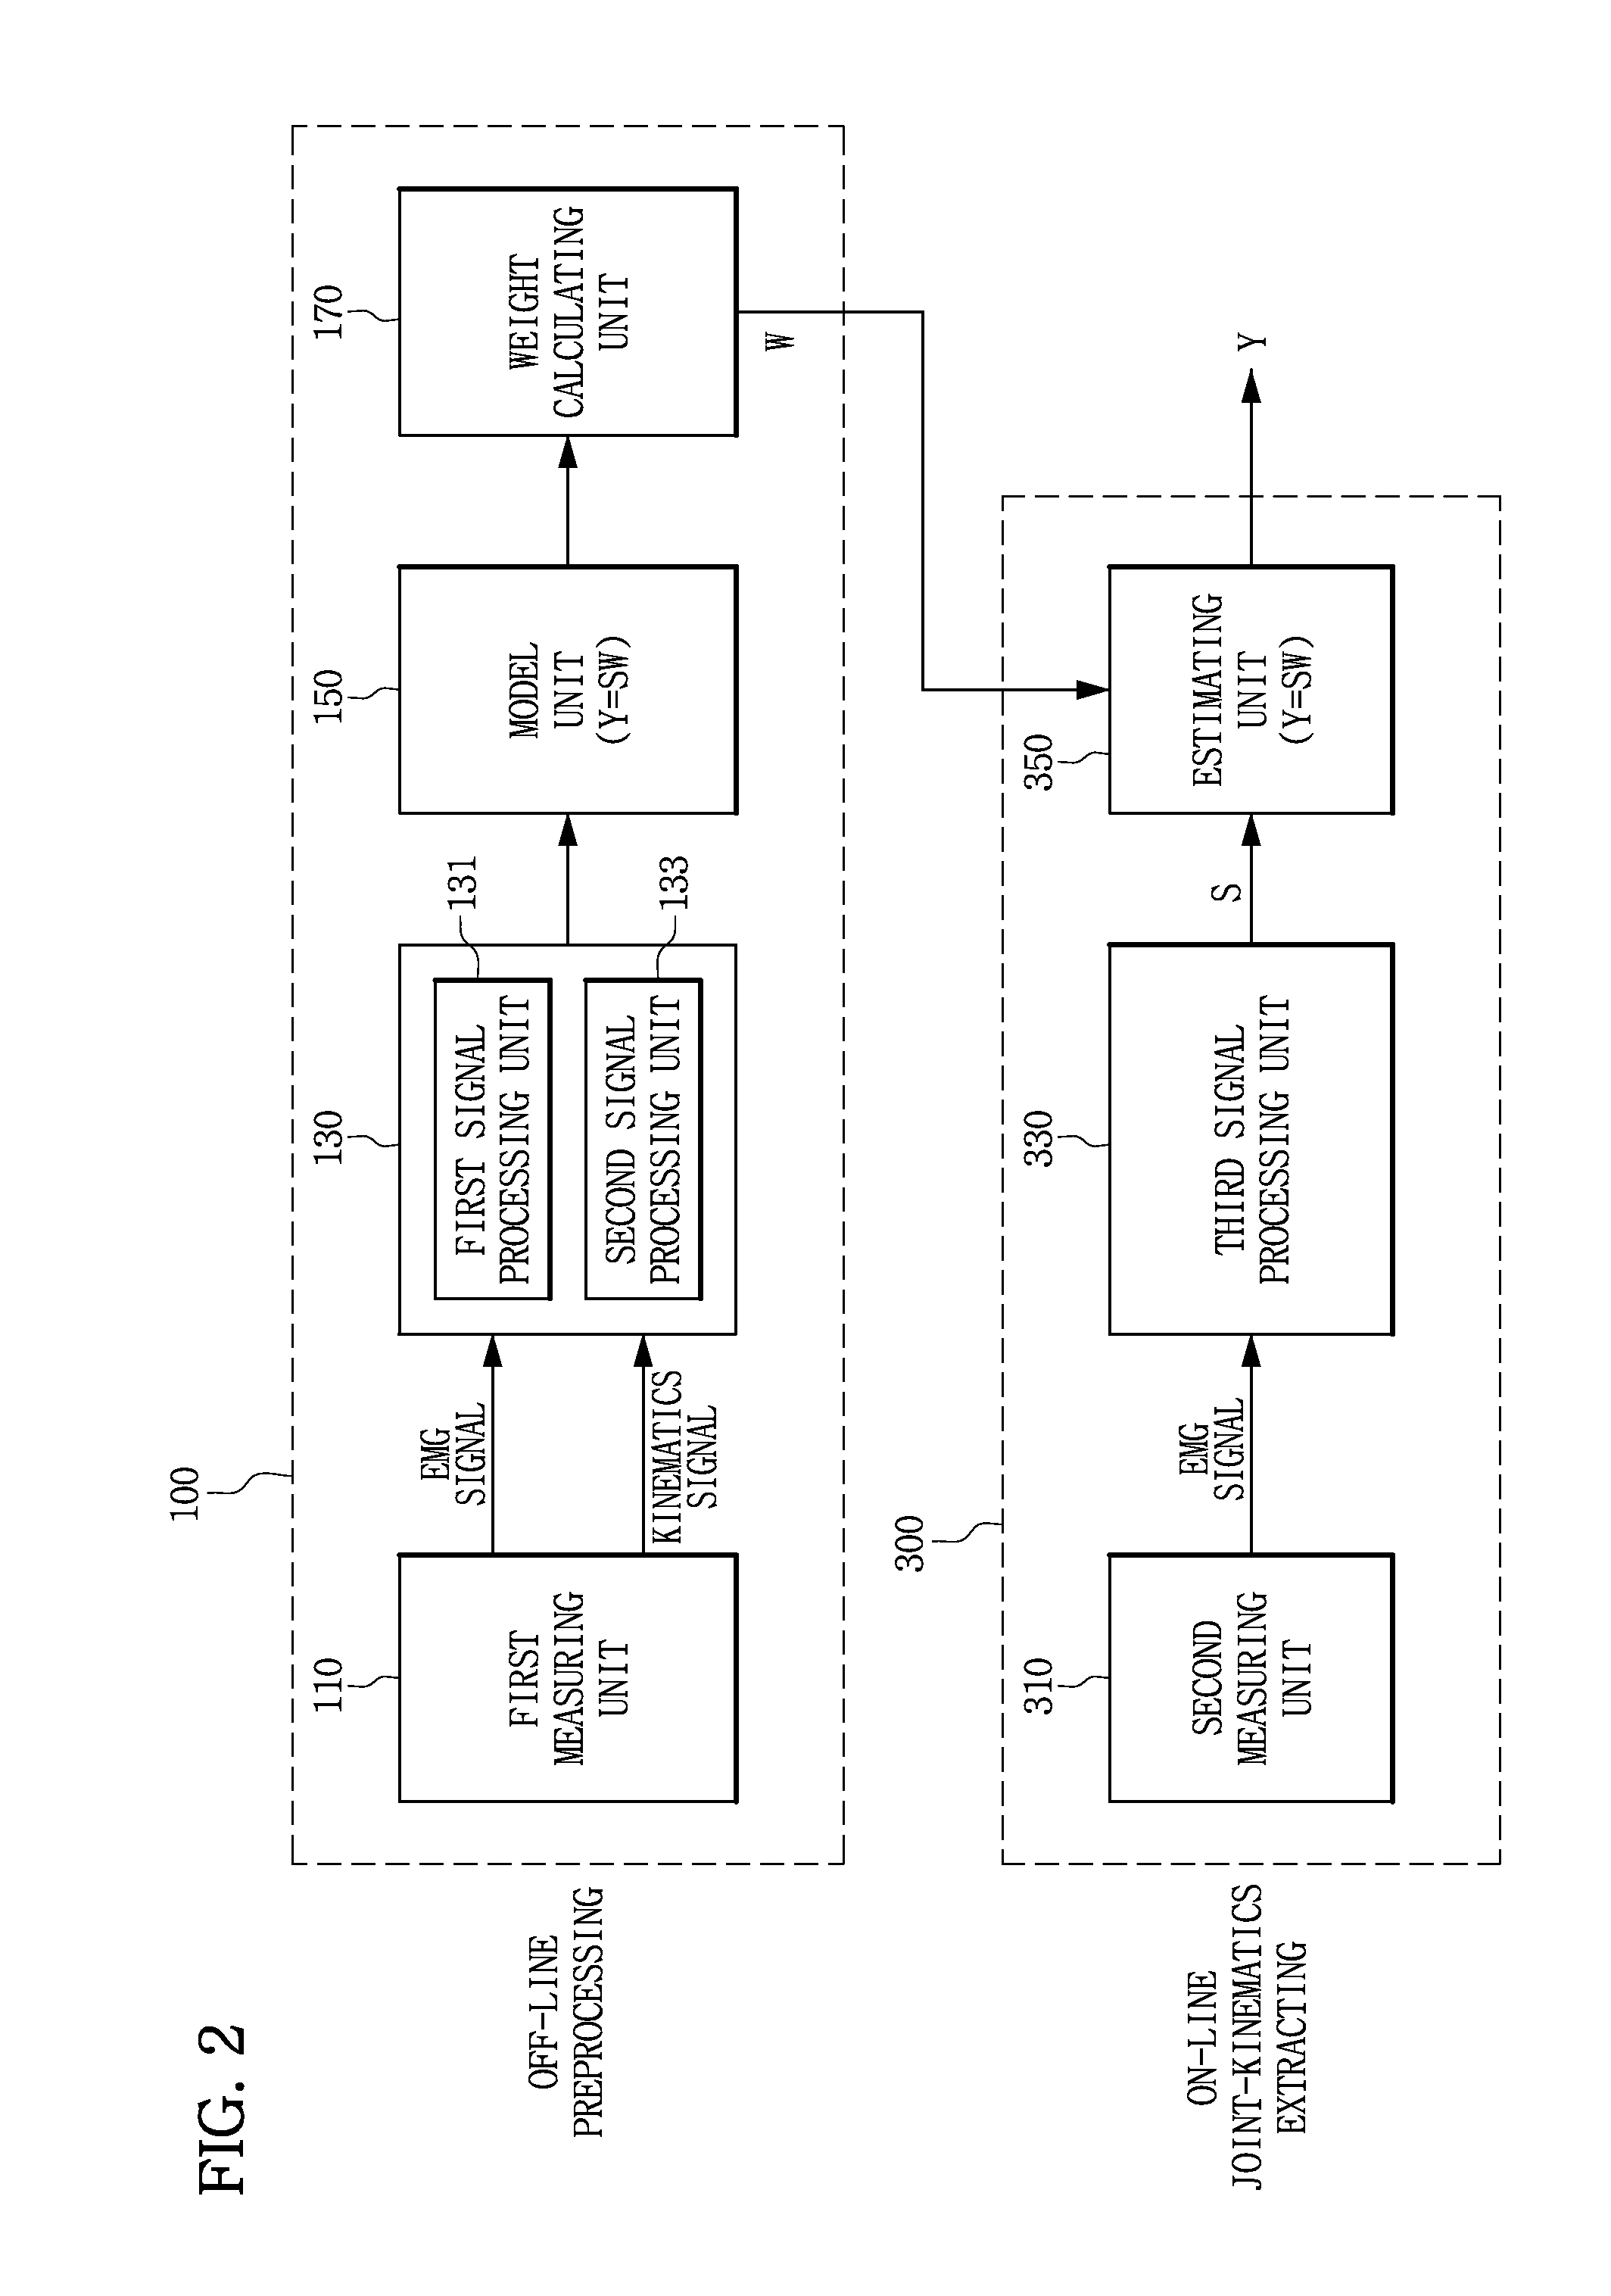 Human joint kinematics information extraction method from multi-channel surface electromyogram signals, recording medium and device for performing the method